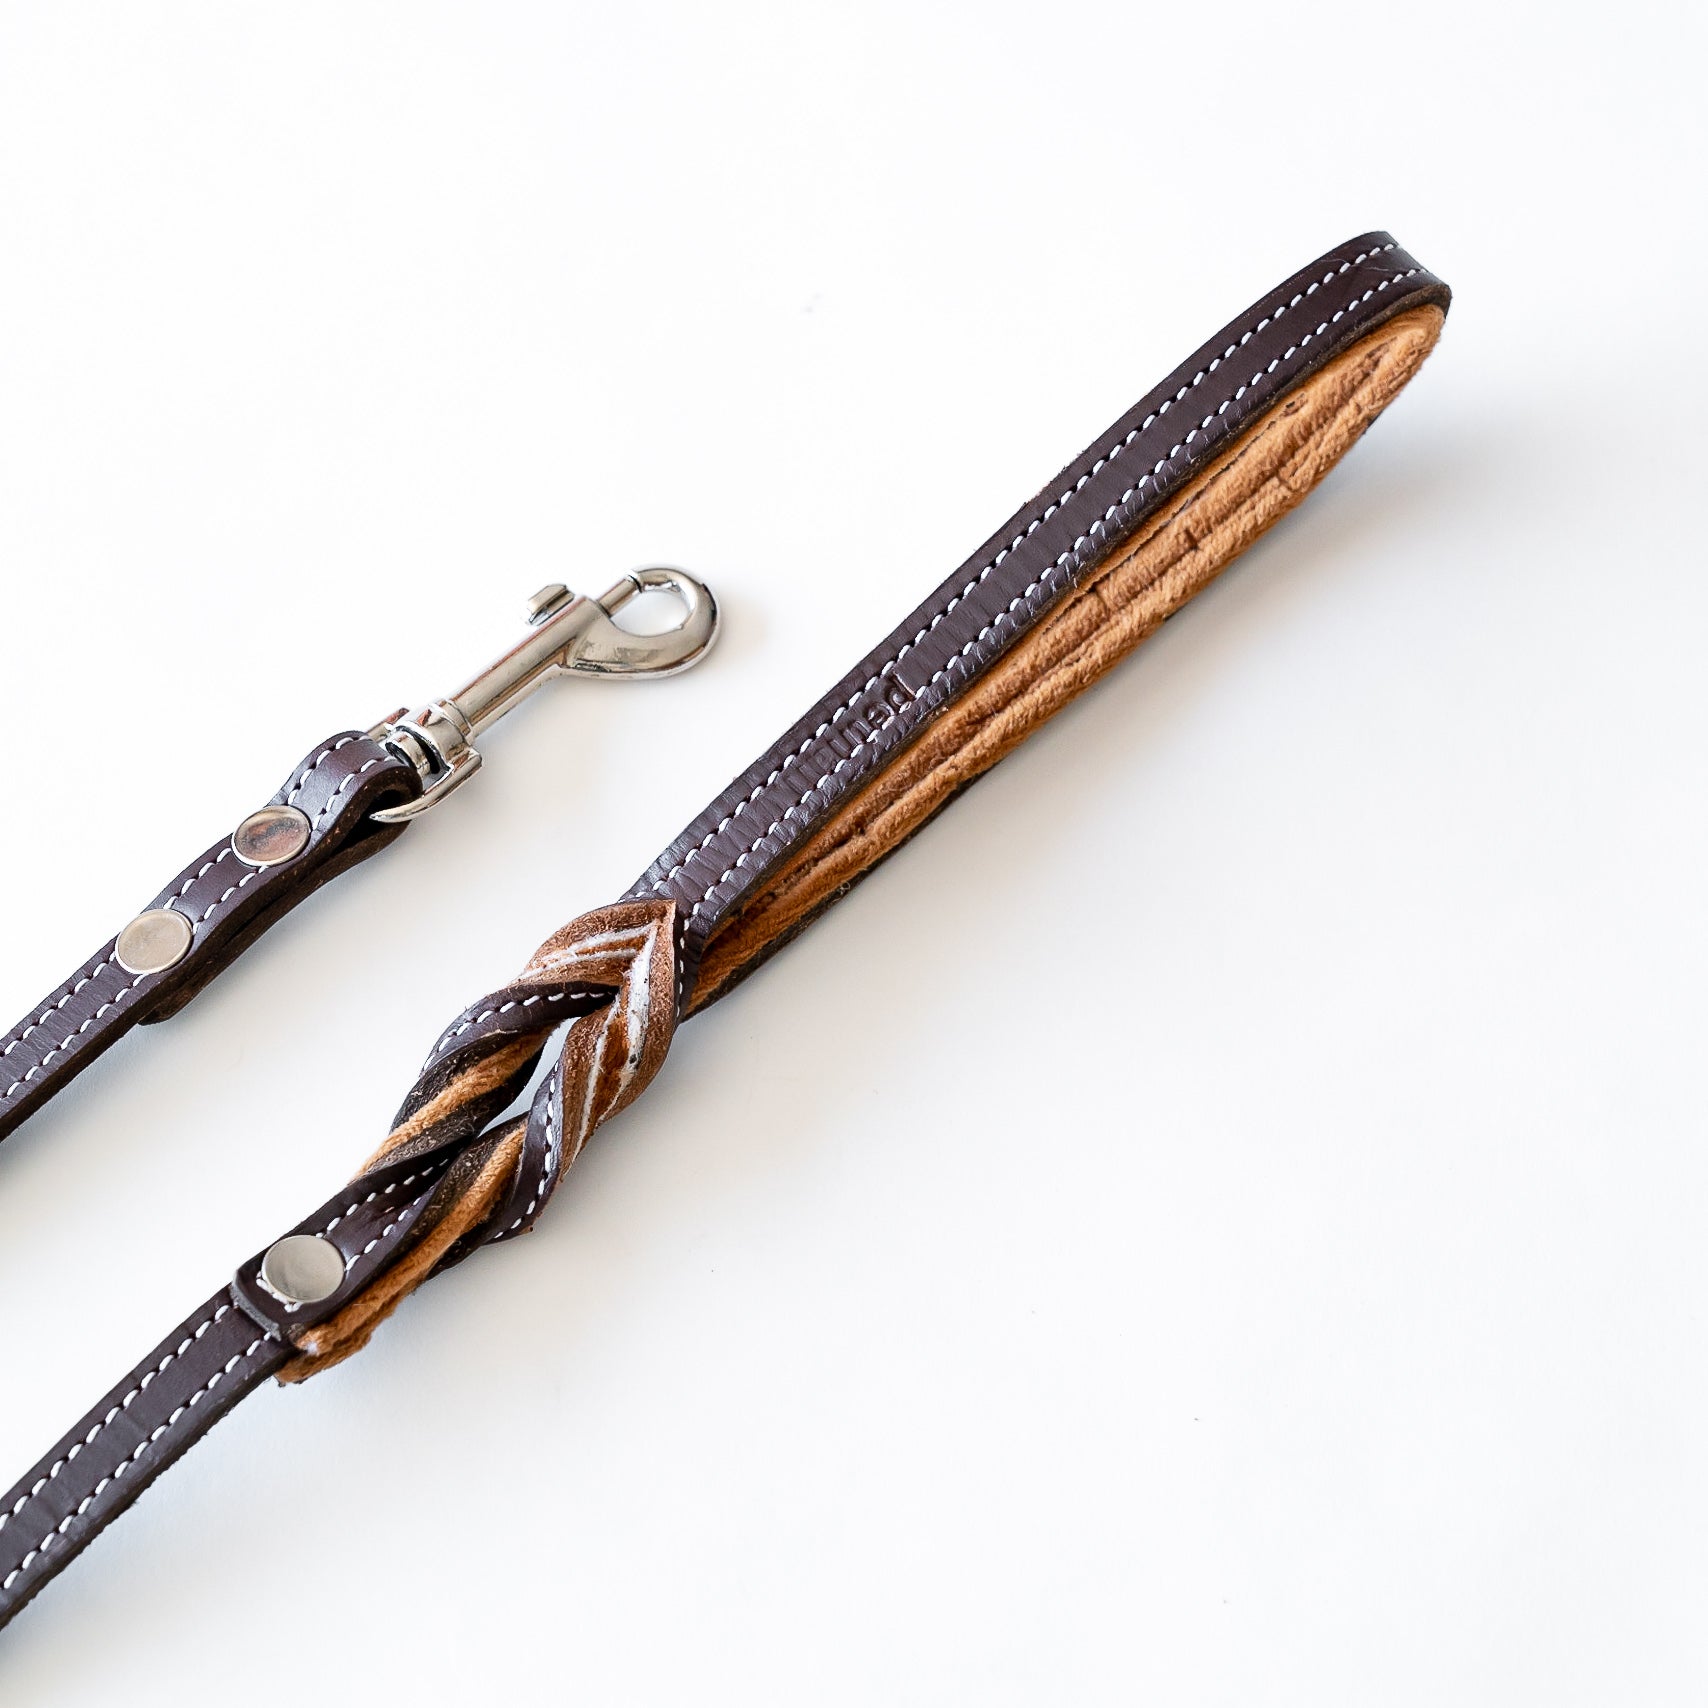 Lux Leather Leash - Best Leather Dog Leash